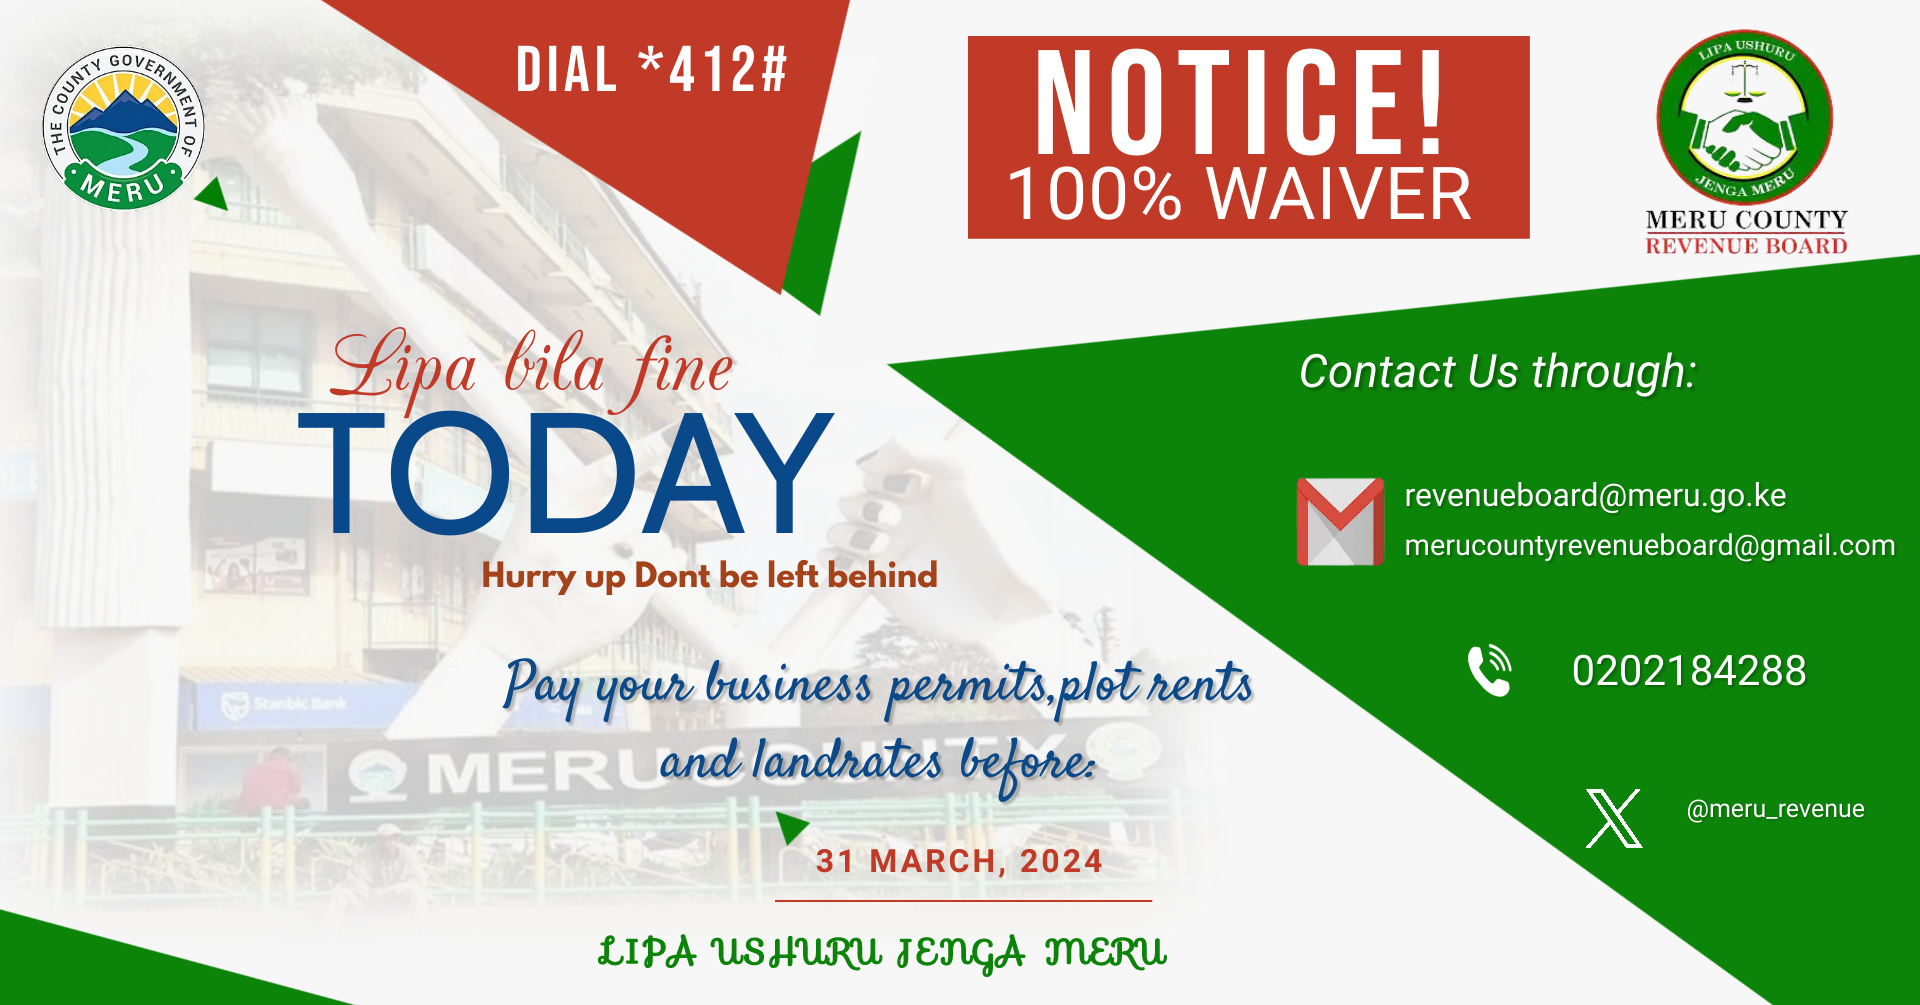 Urgent Reminder: Deadline Today for 100% Waiver on Business Permits, Land Rates, and Plot Rents.